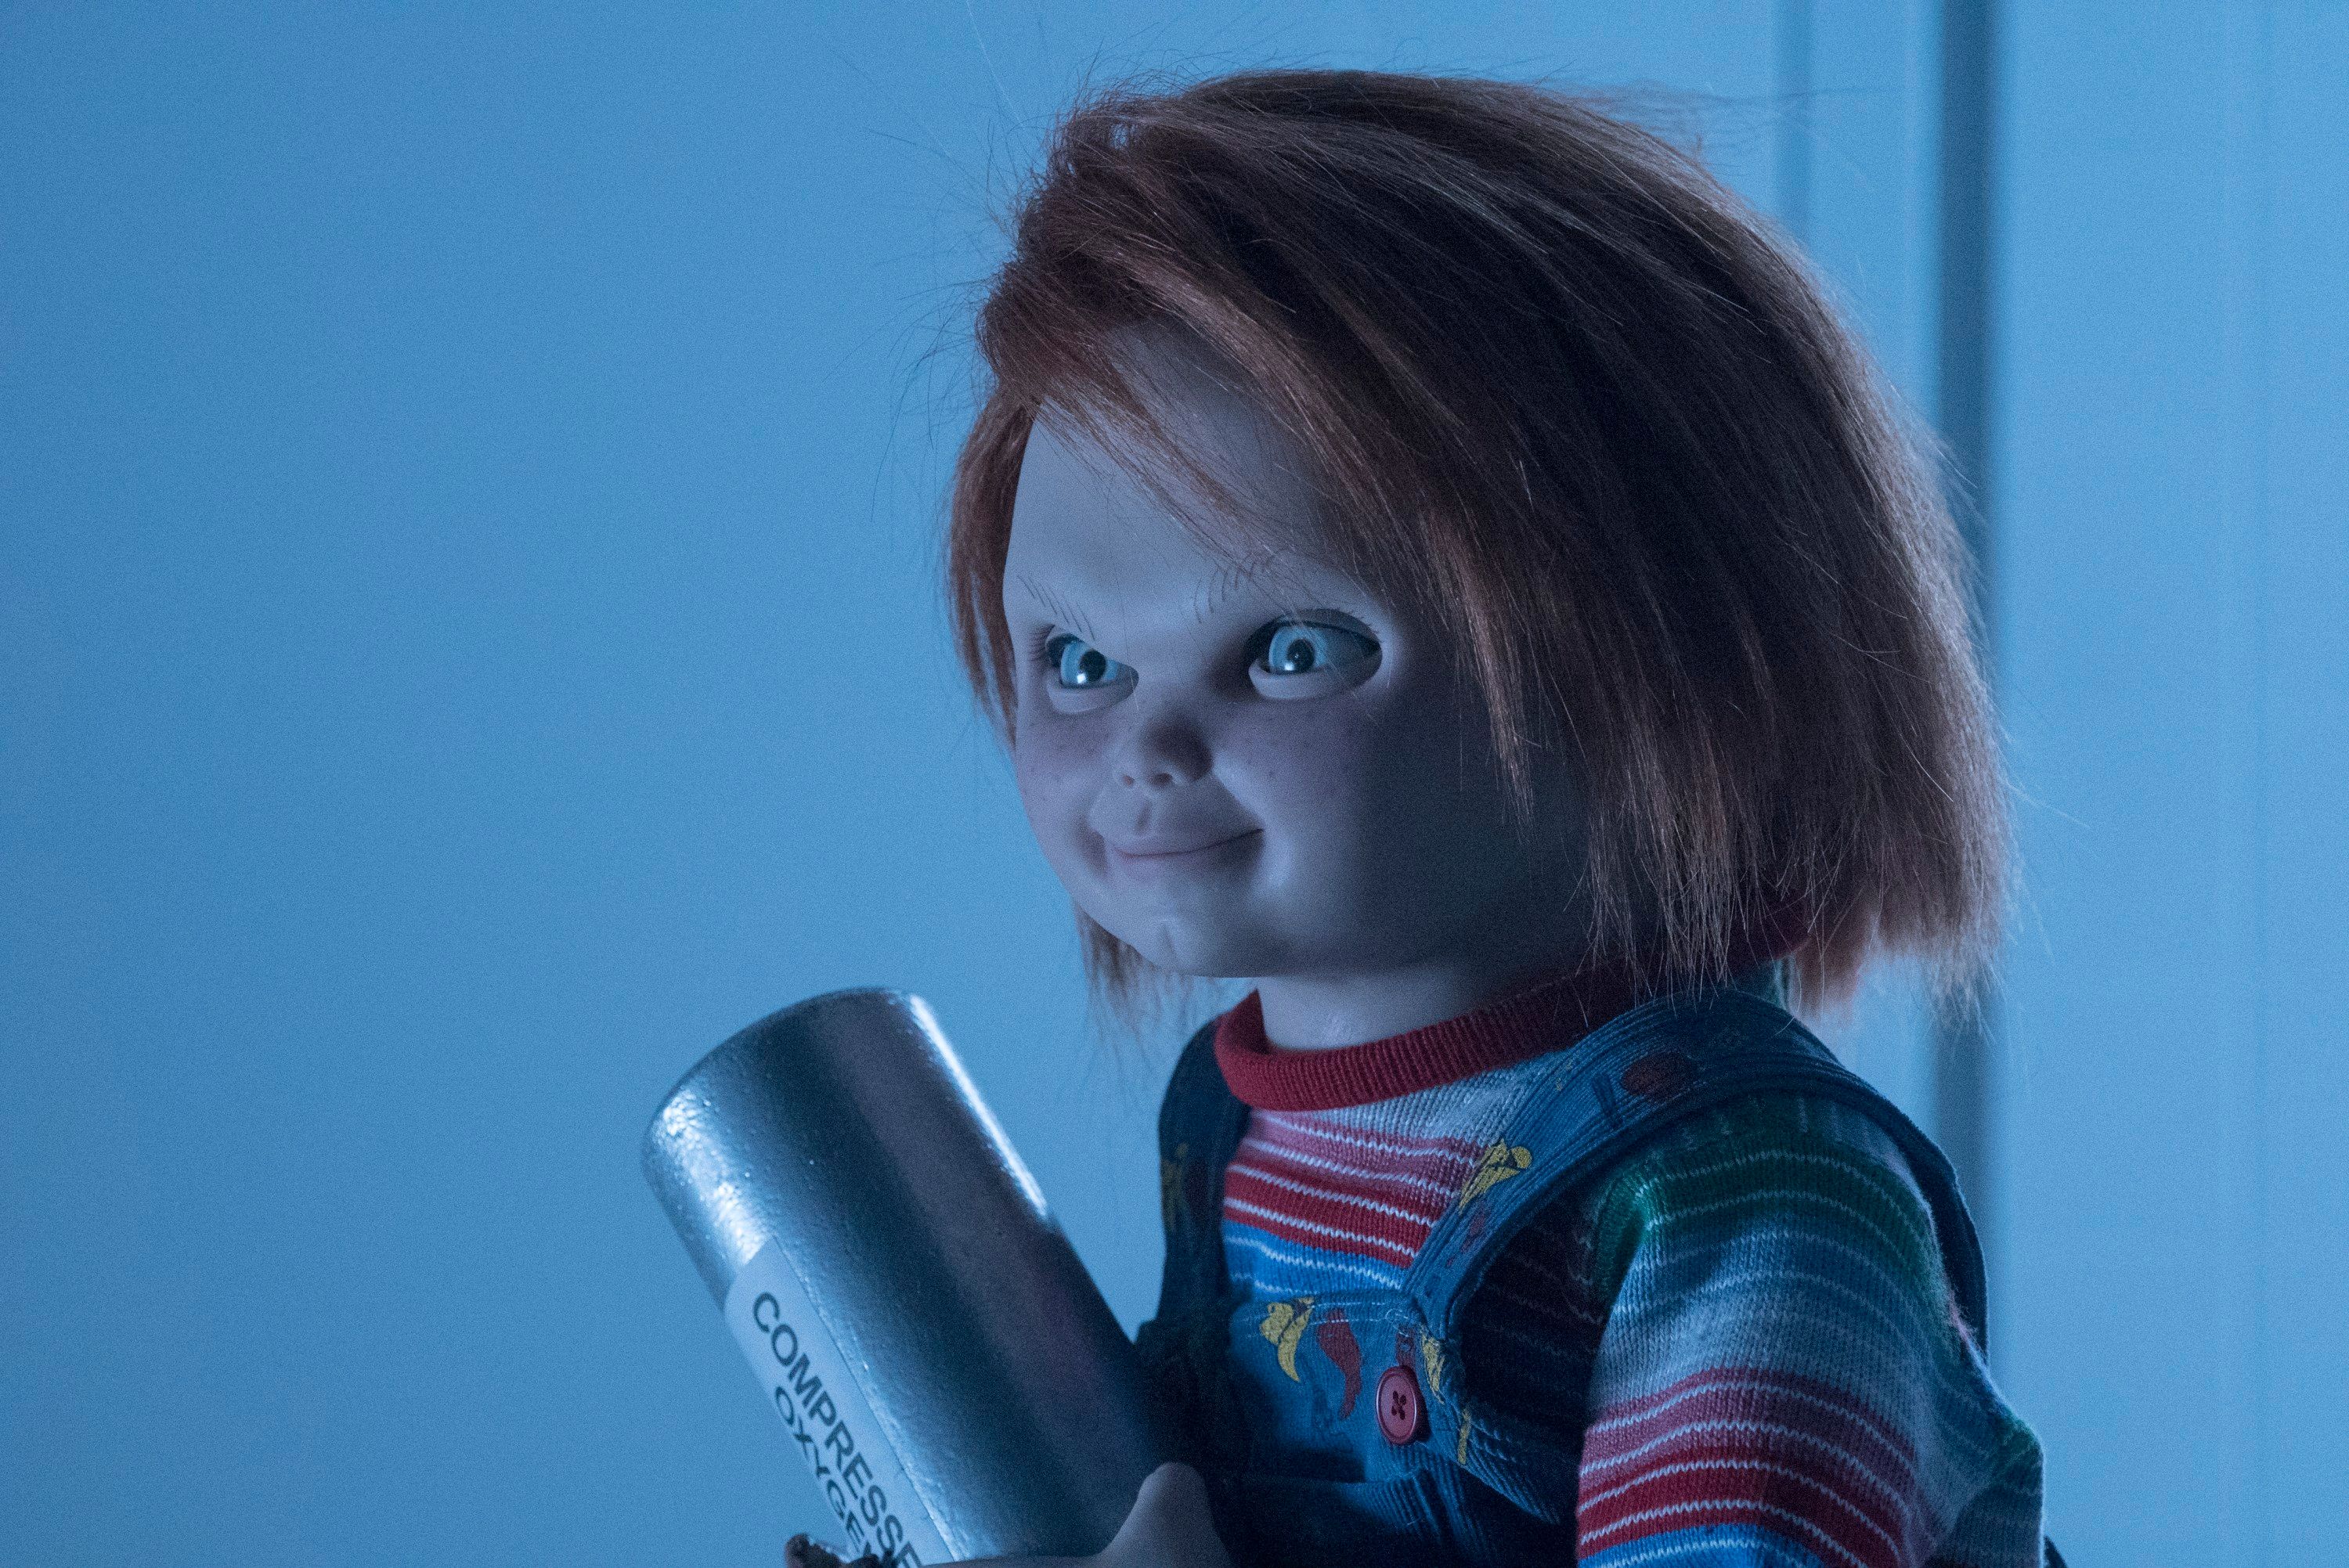 curse of chucky full movie download 720p